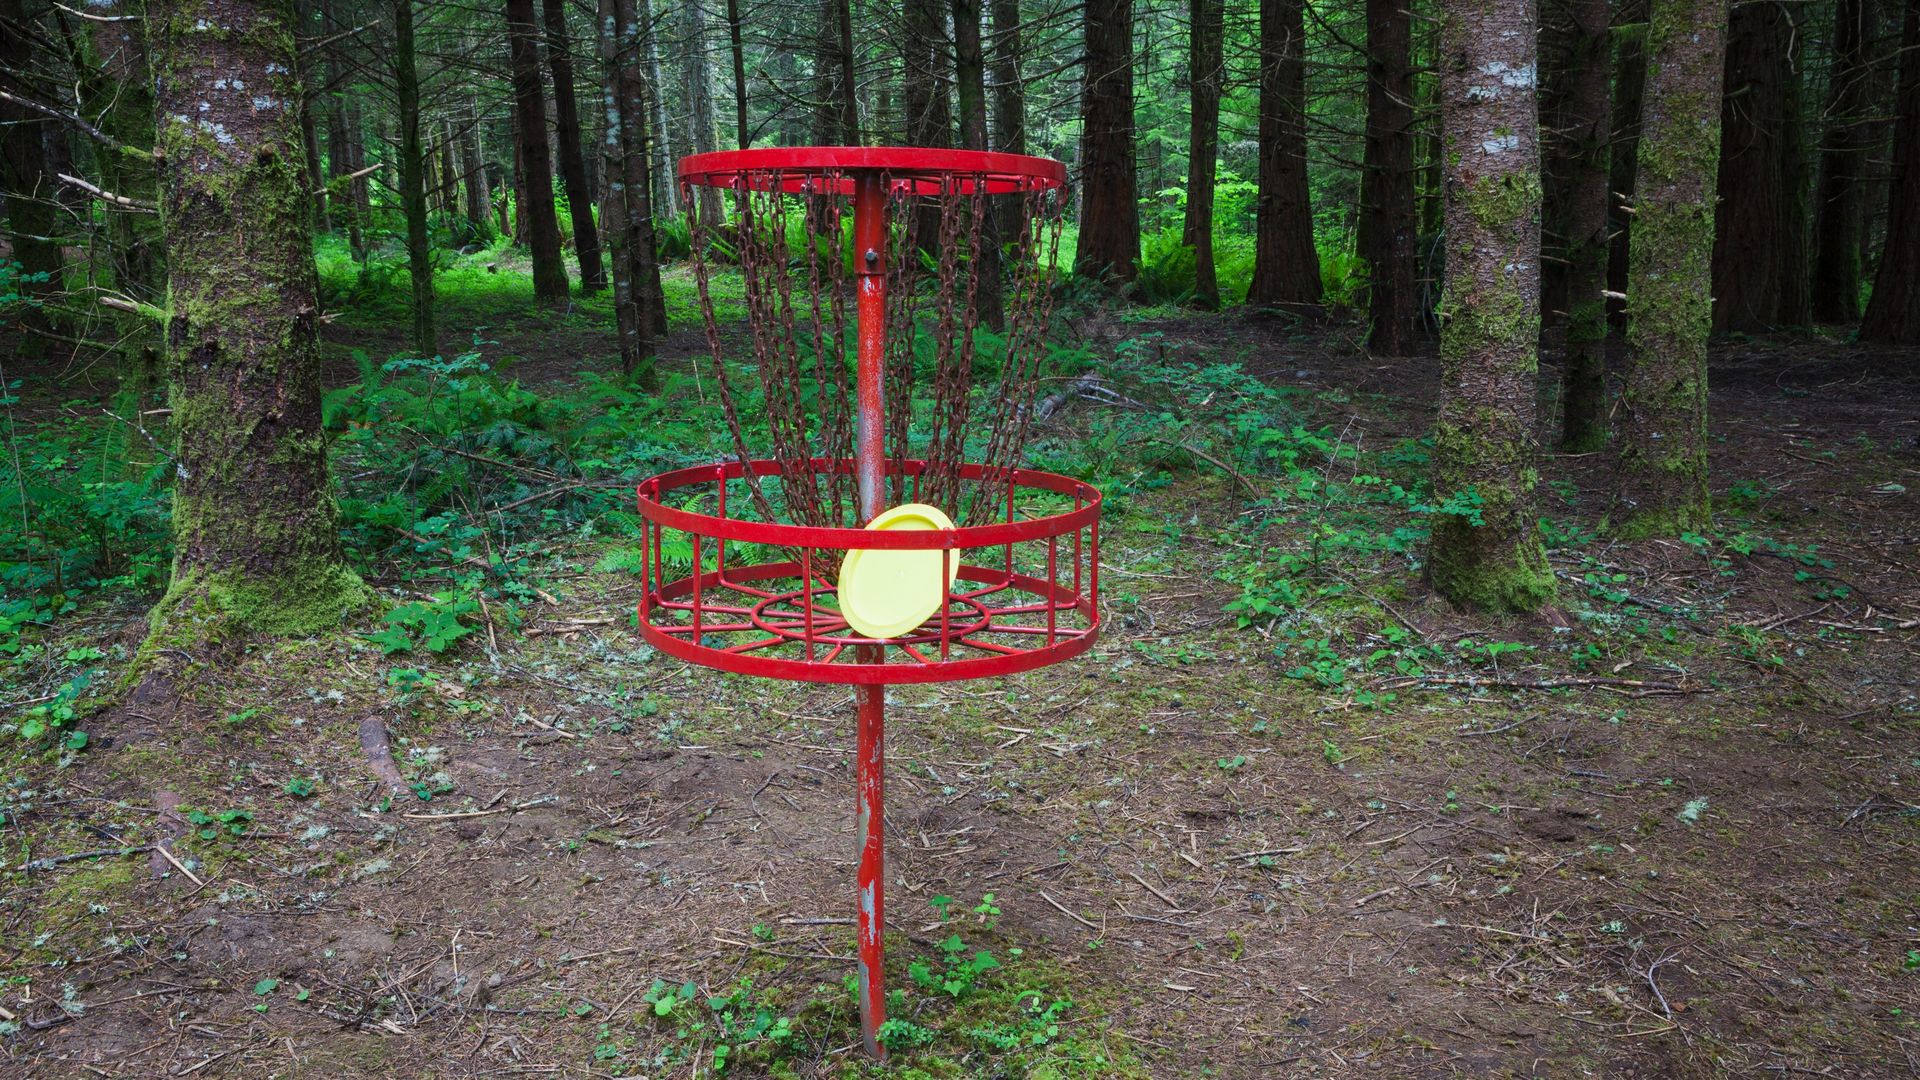 Disc golf hole in the forest